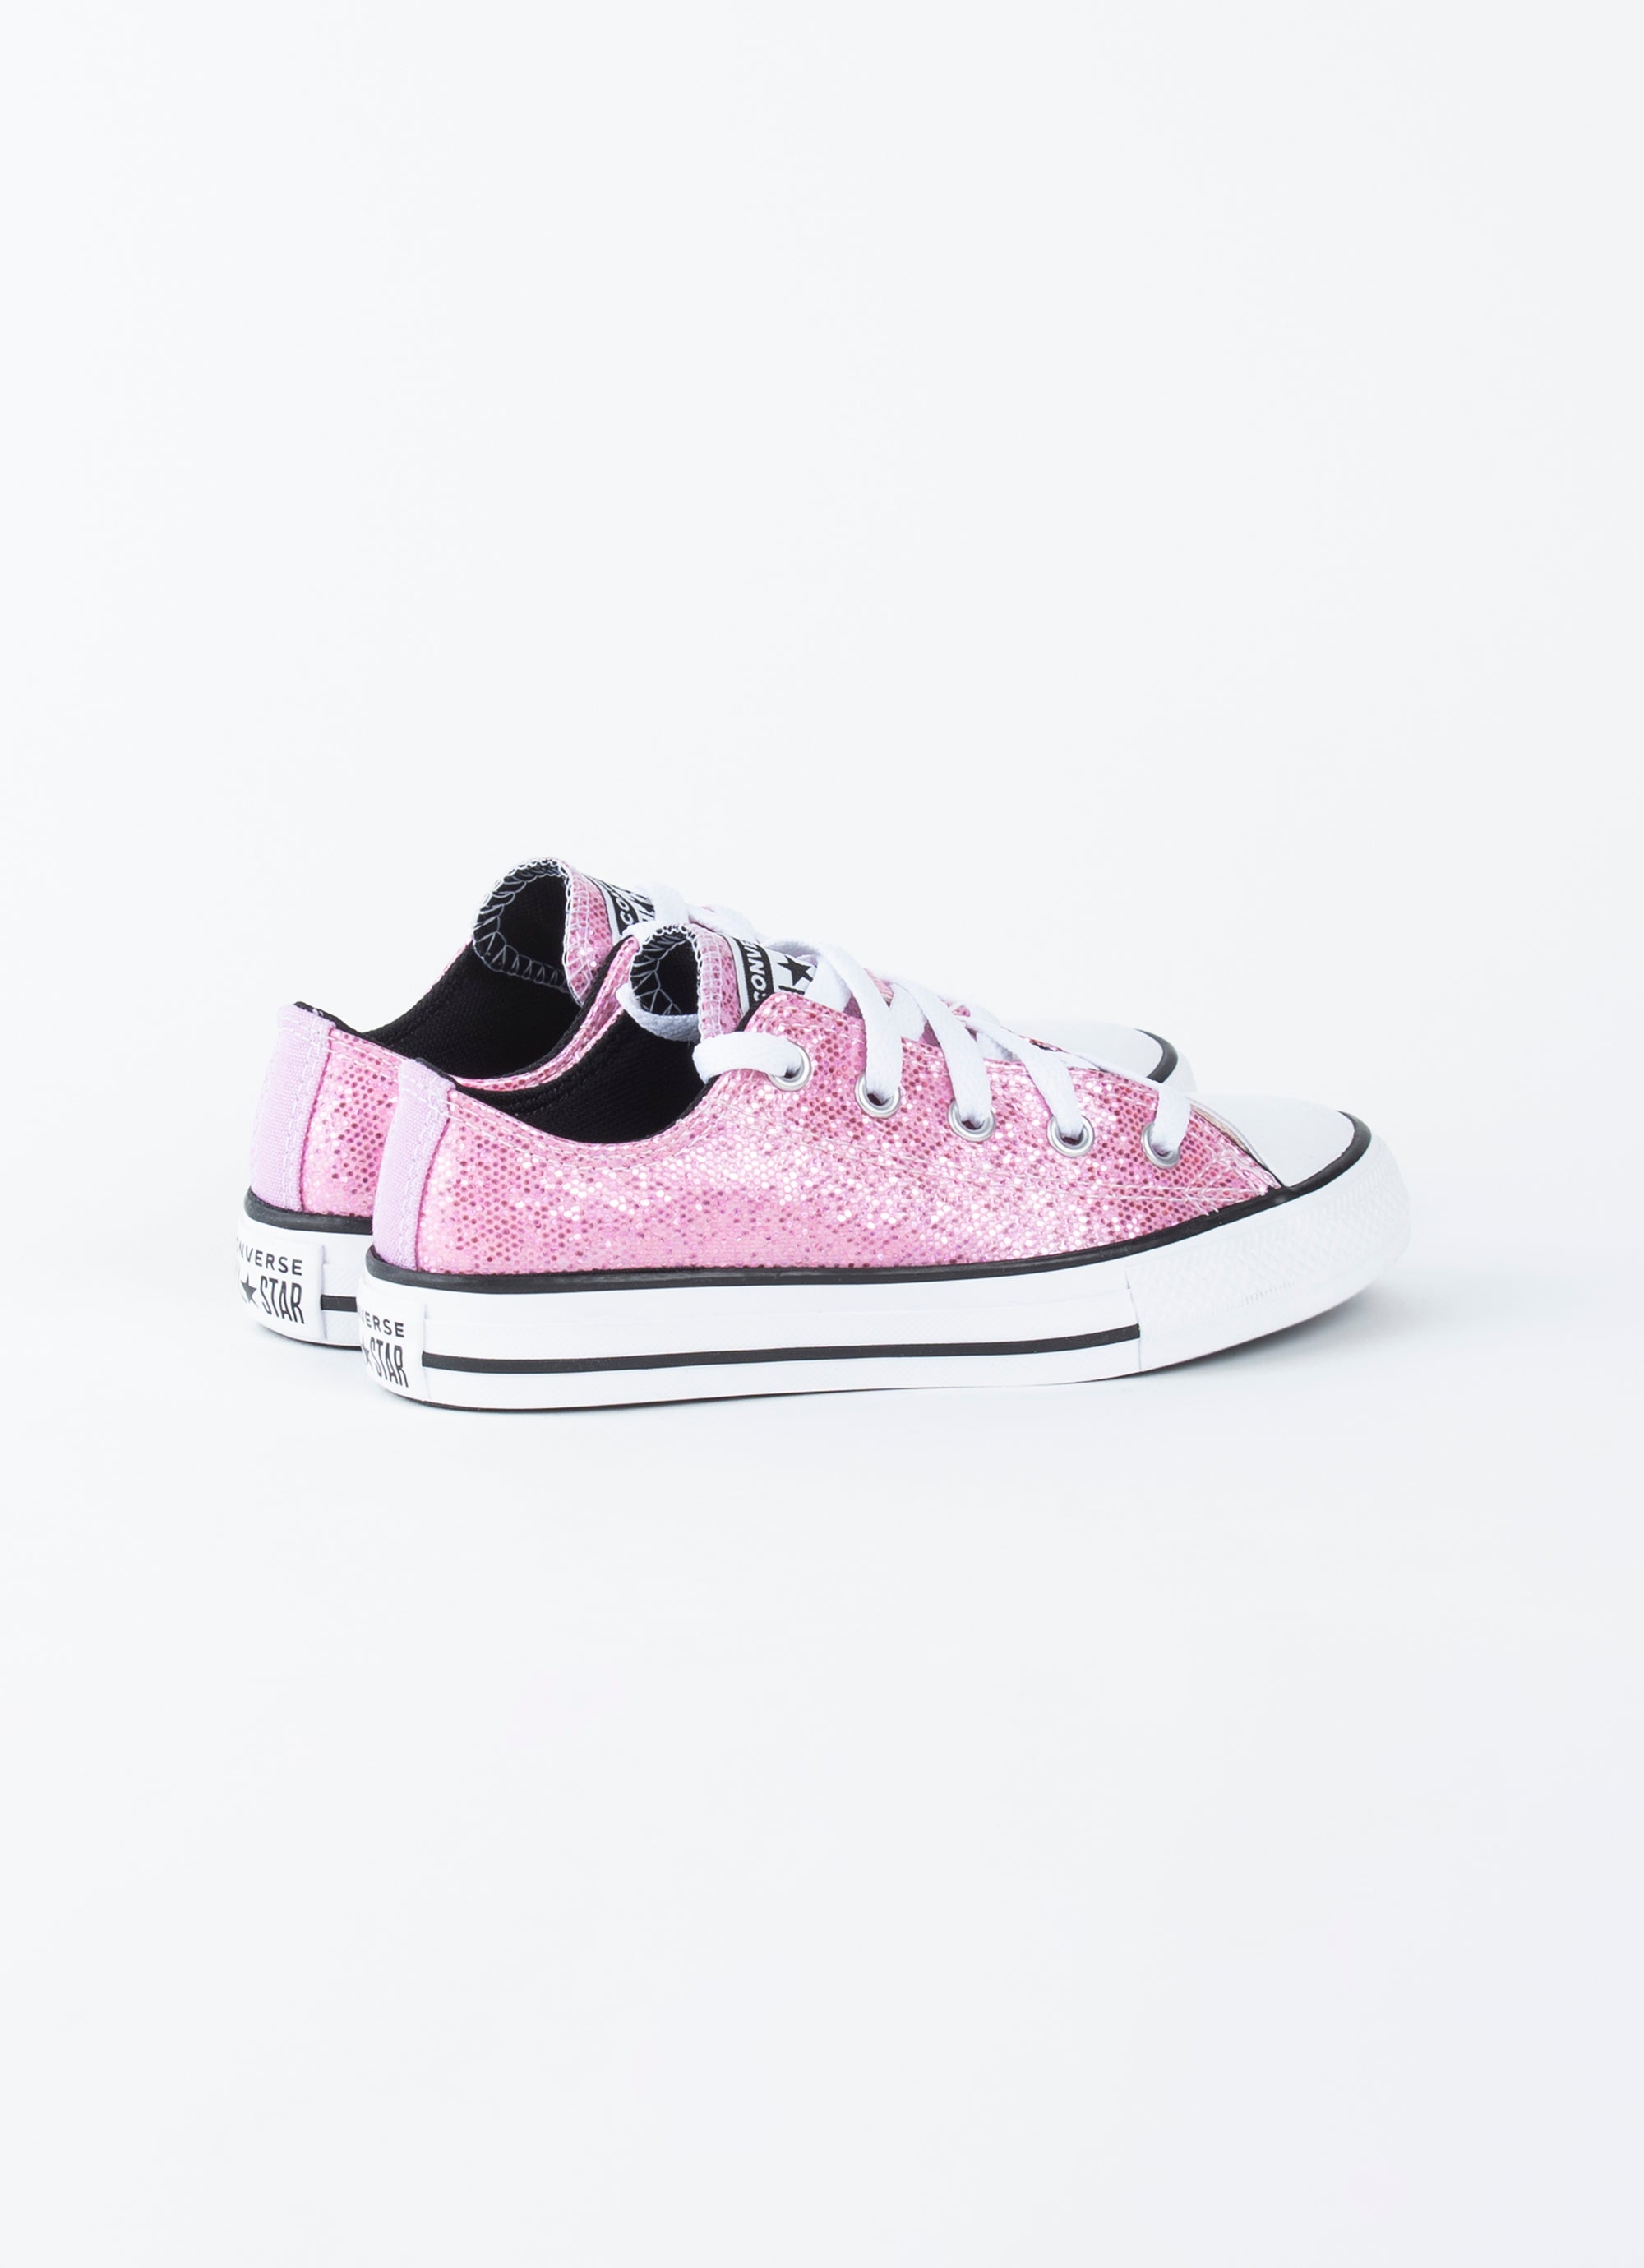 Converse Chuck Taylor Glitter Low Shoe - Kids in Unknown | Red Rat